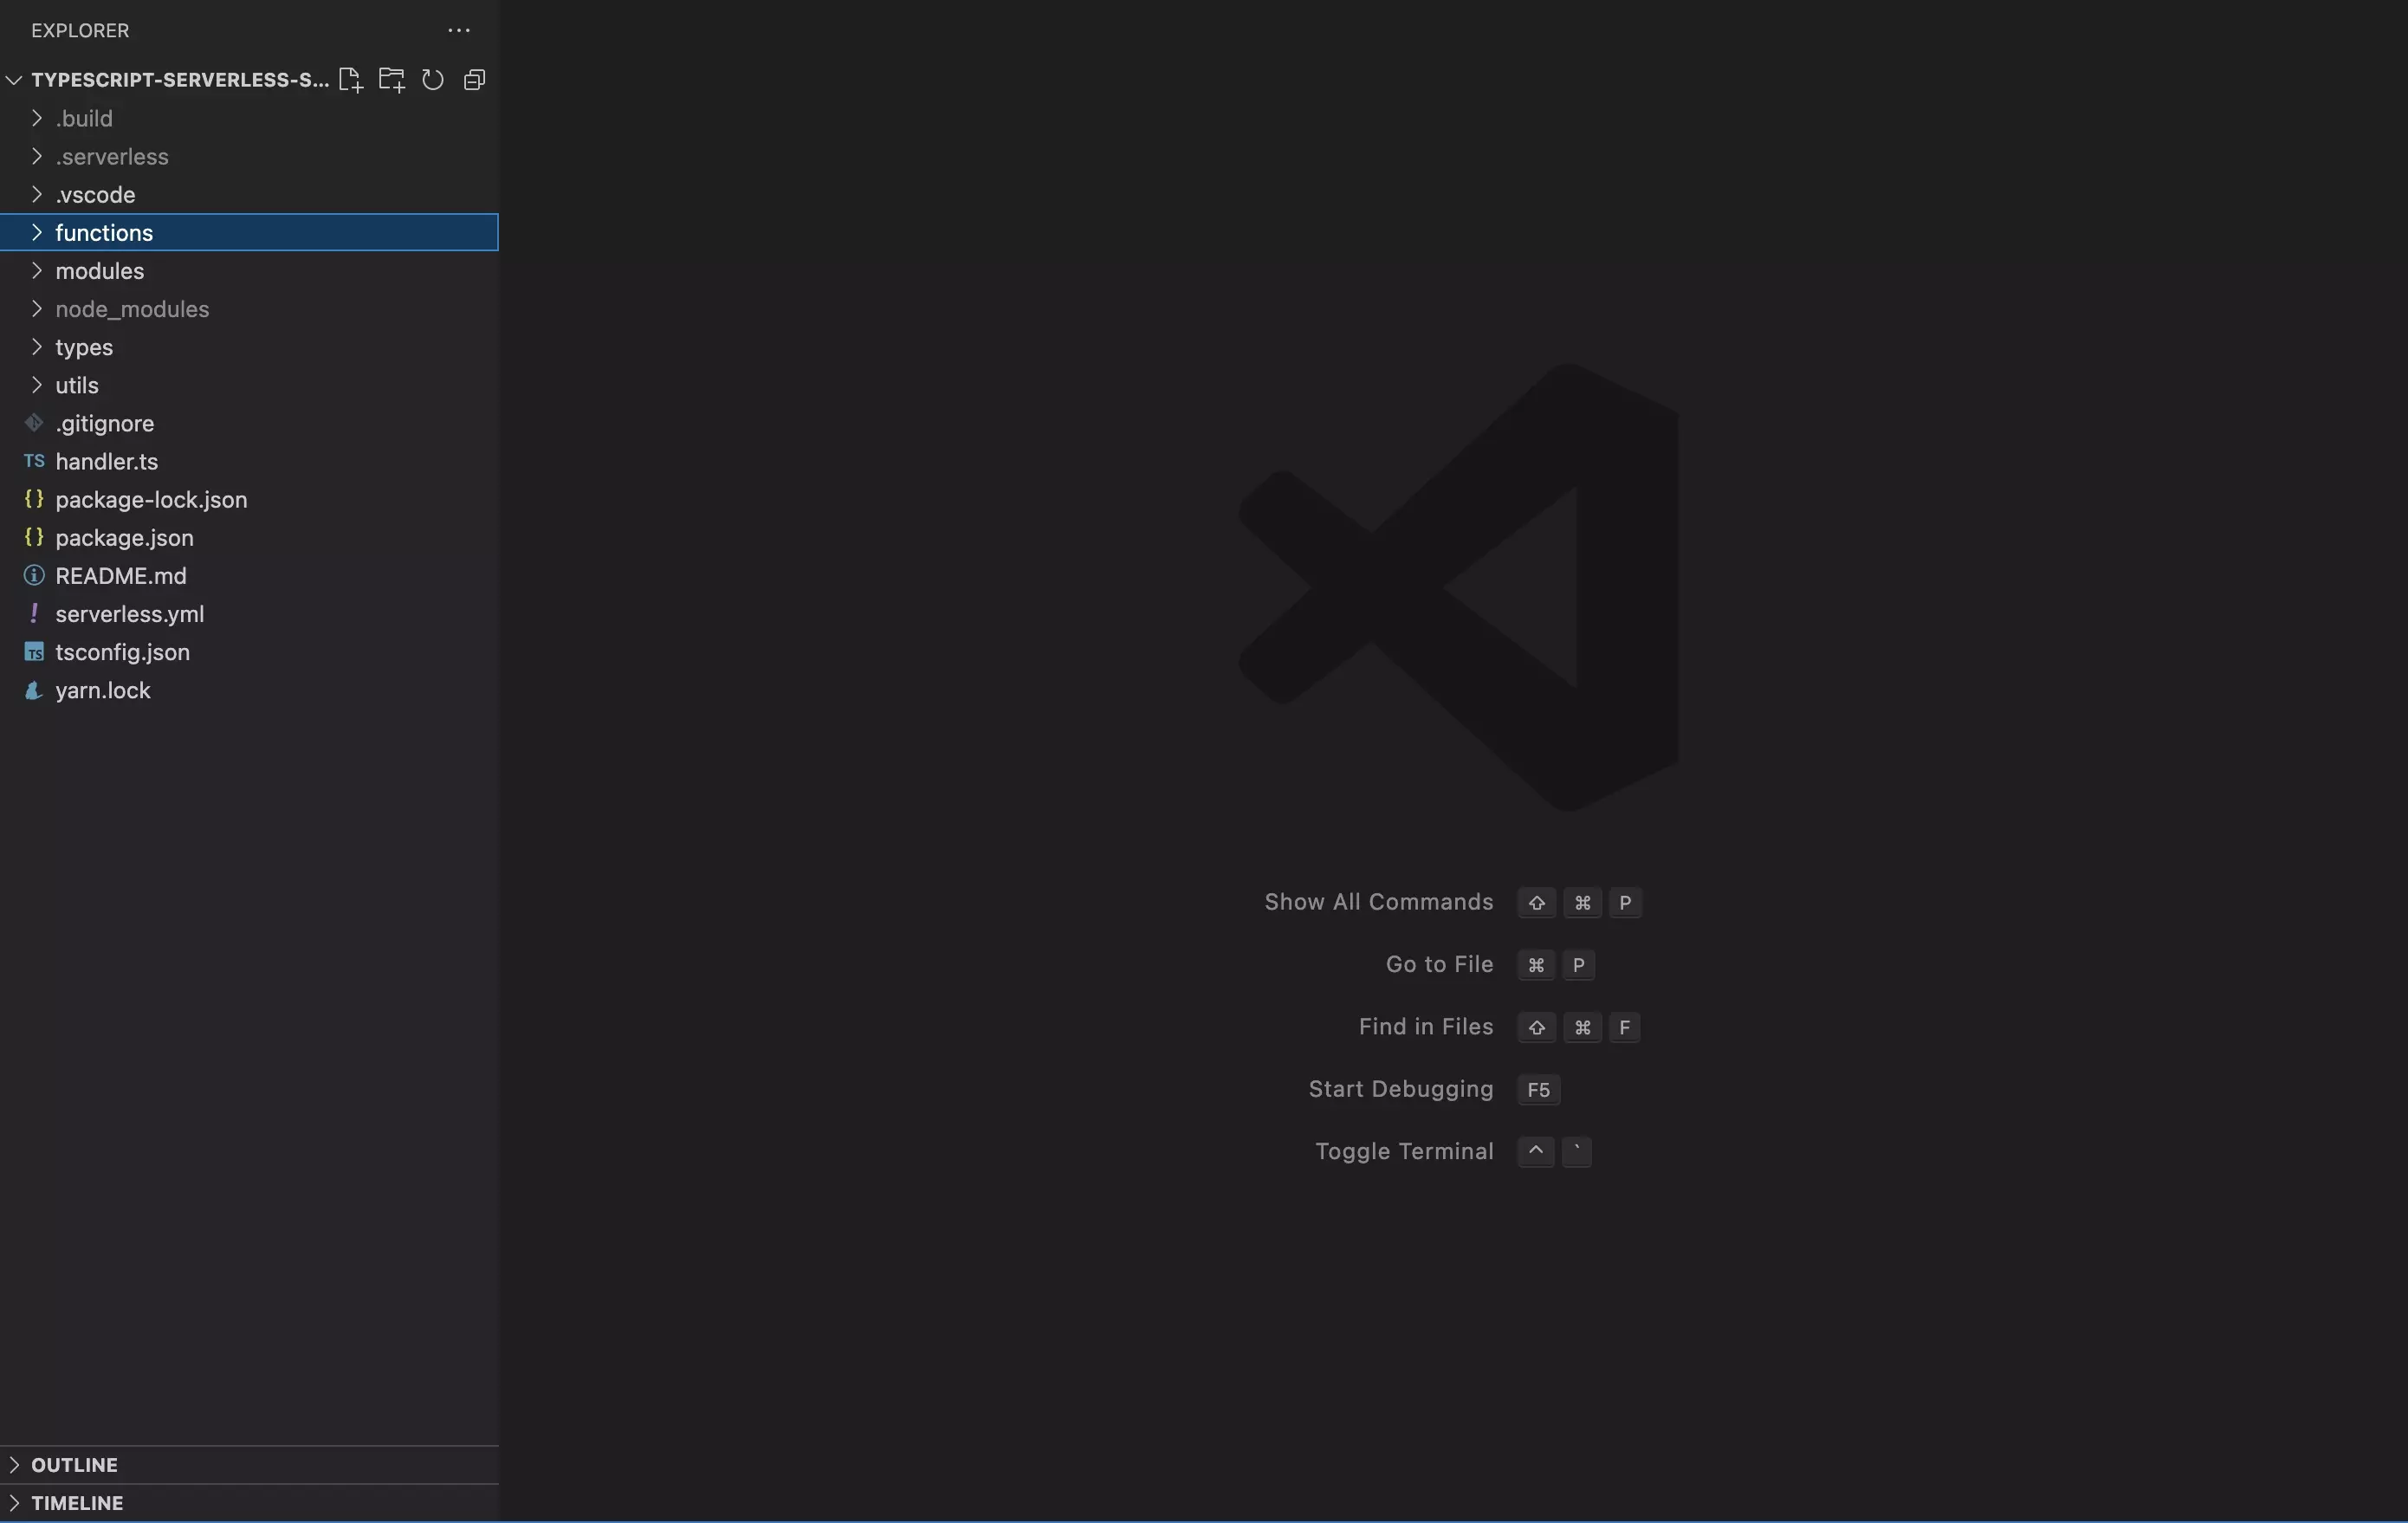 A screenshot of VSCode with the folder structure that we suggest you follow. This folder structure is detailed below.